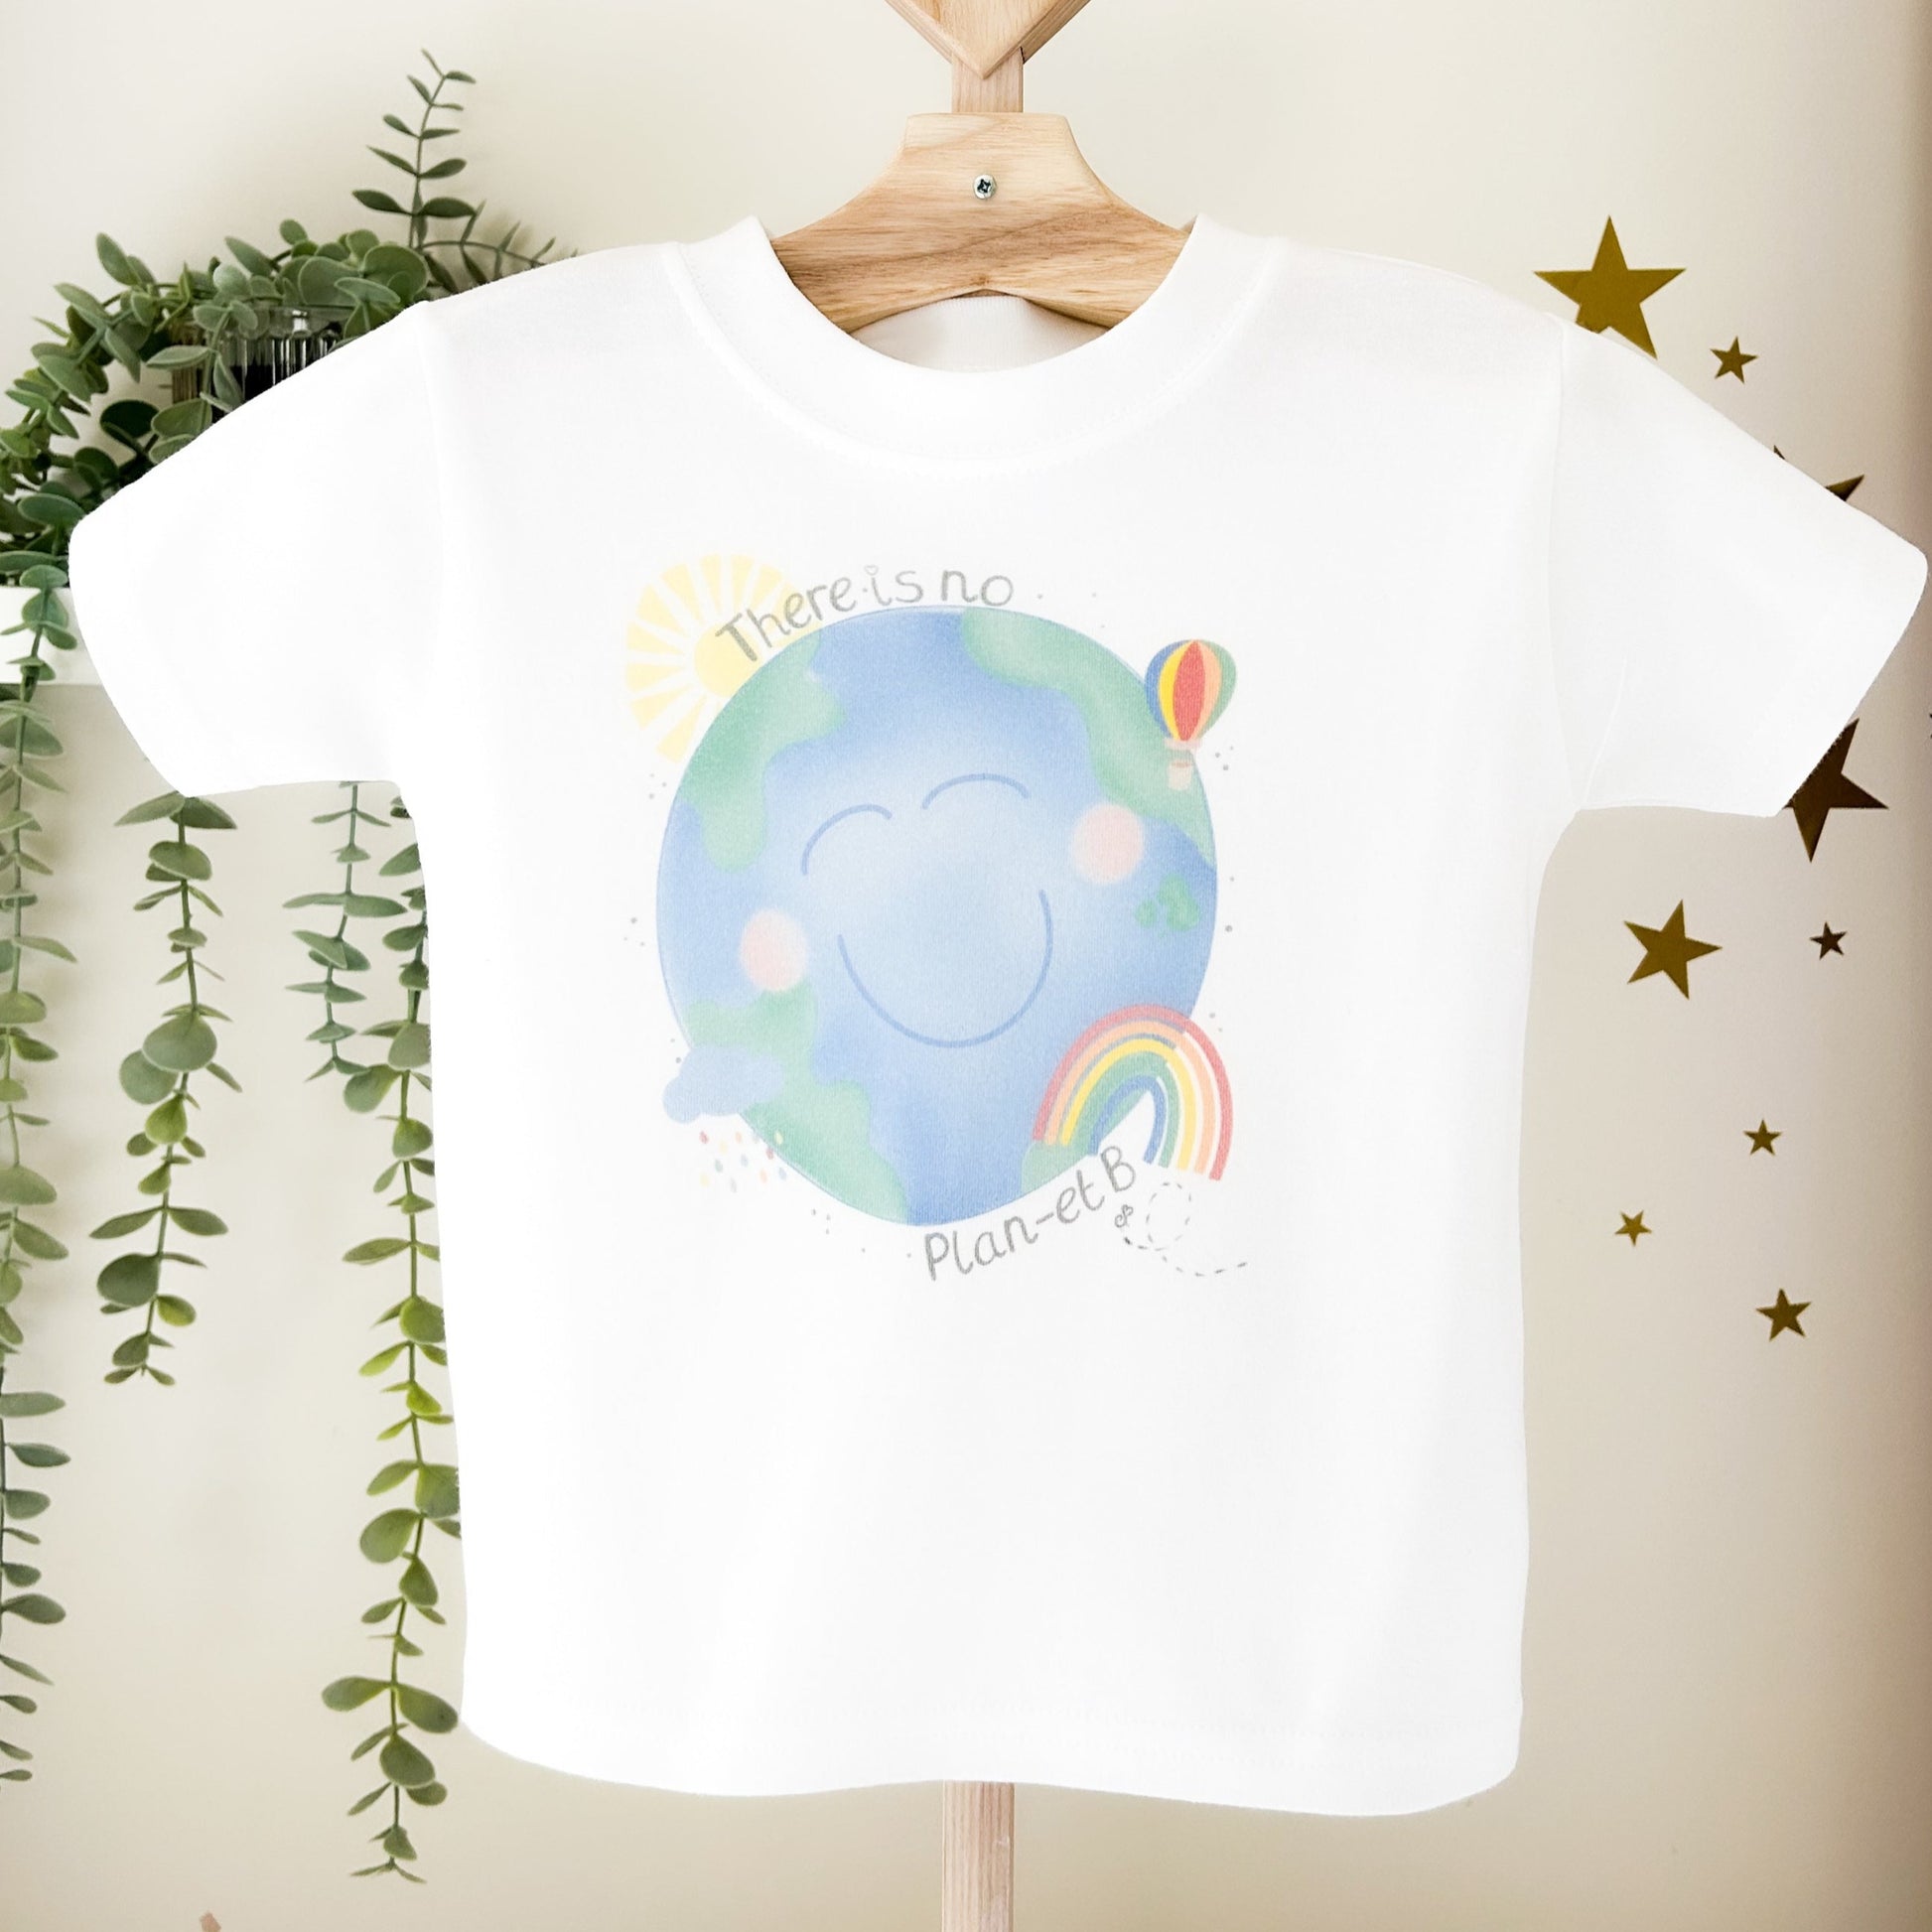 save planet earth kids t-shirt design with world, rainbow and sunshine design